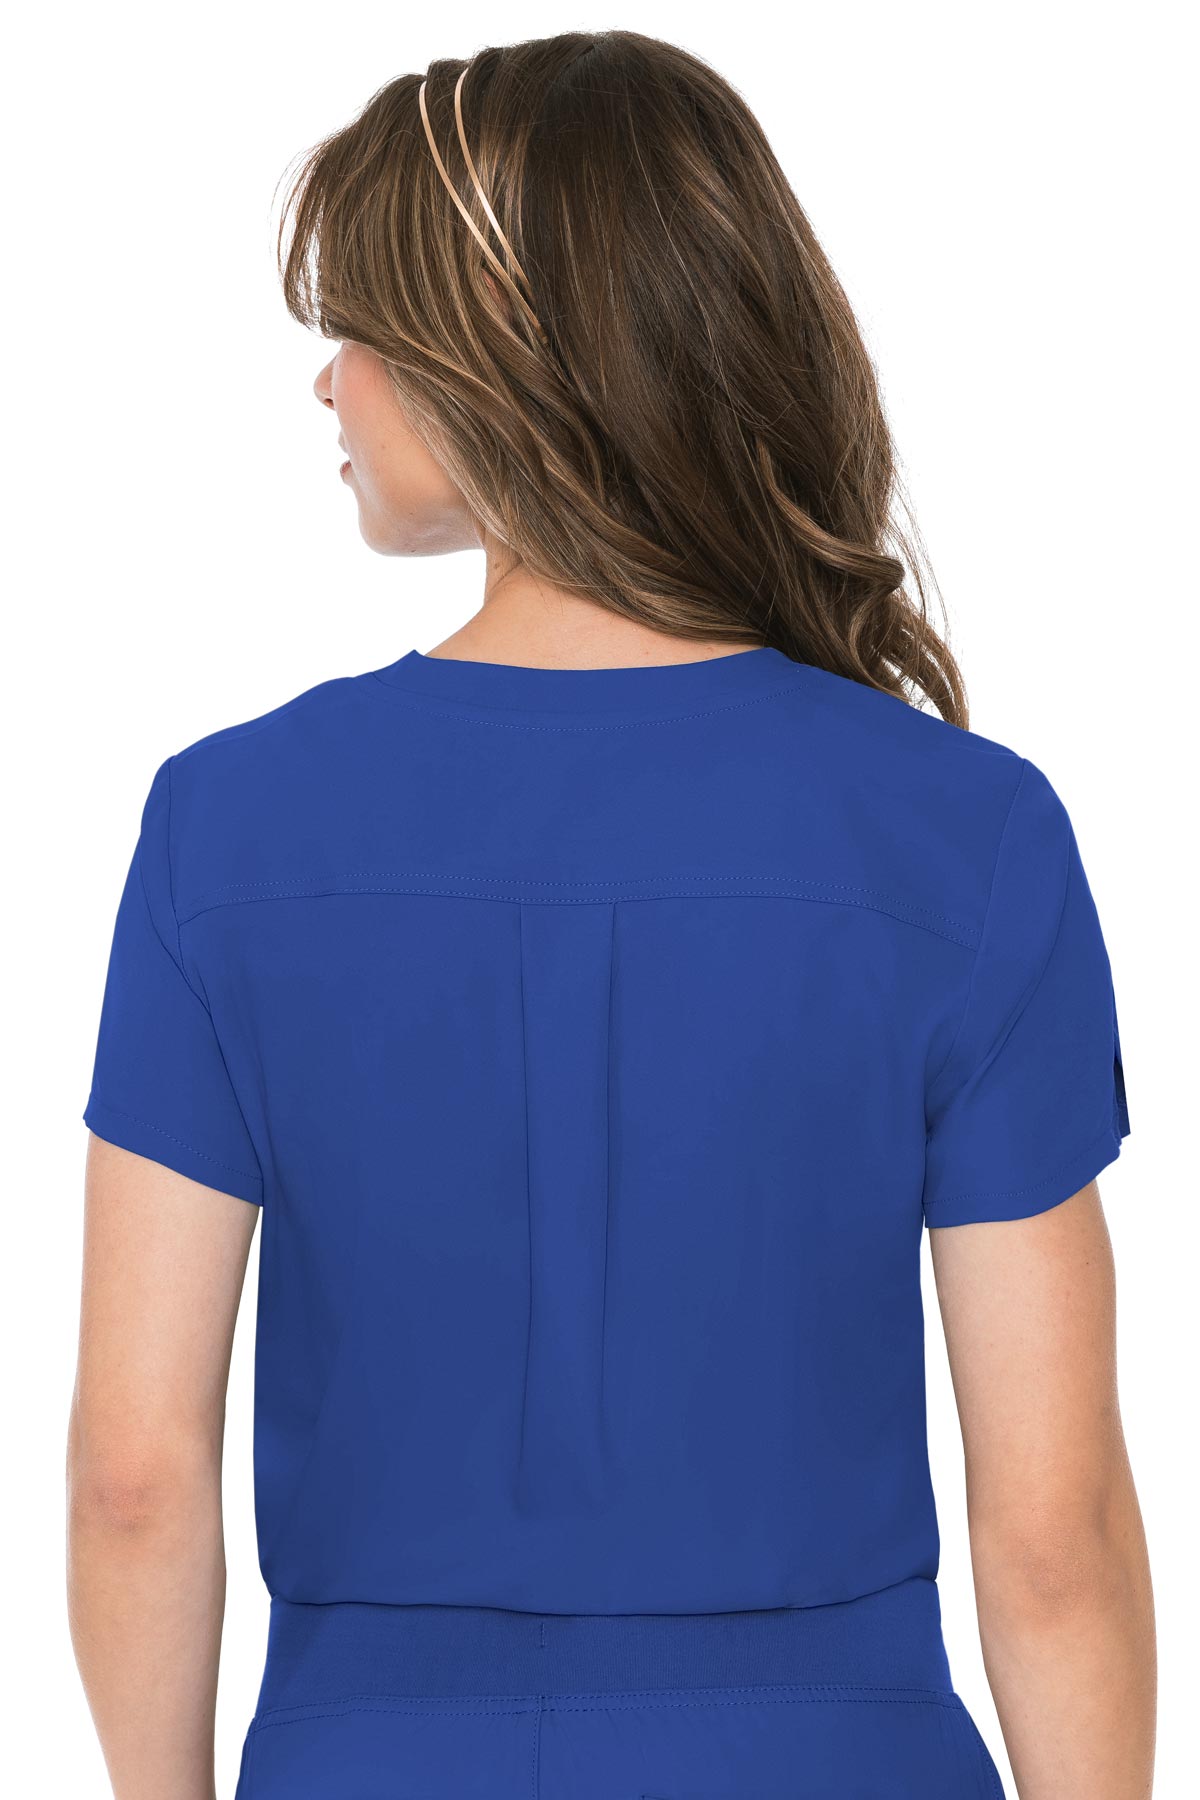 Med Couture 2432 Insight 1 Pocket Women's Tuck-In Top Royal Back